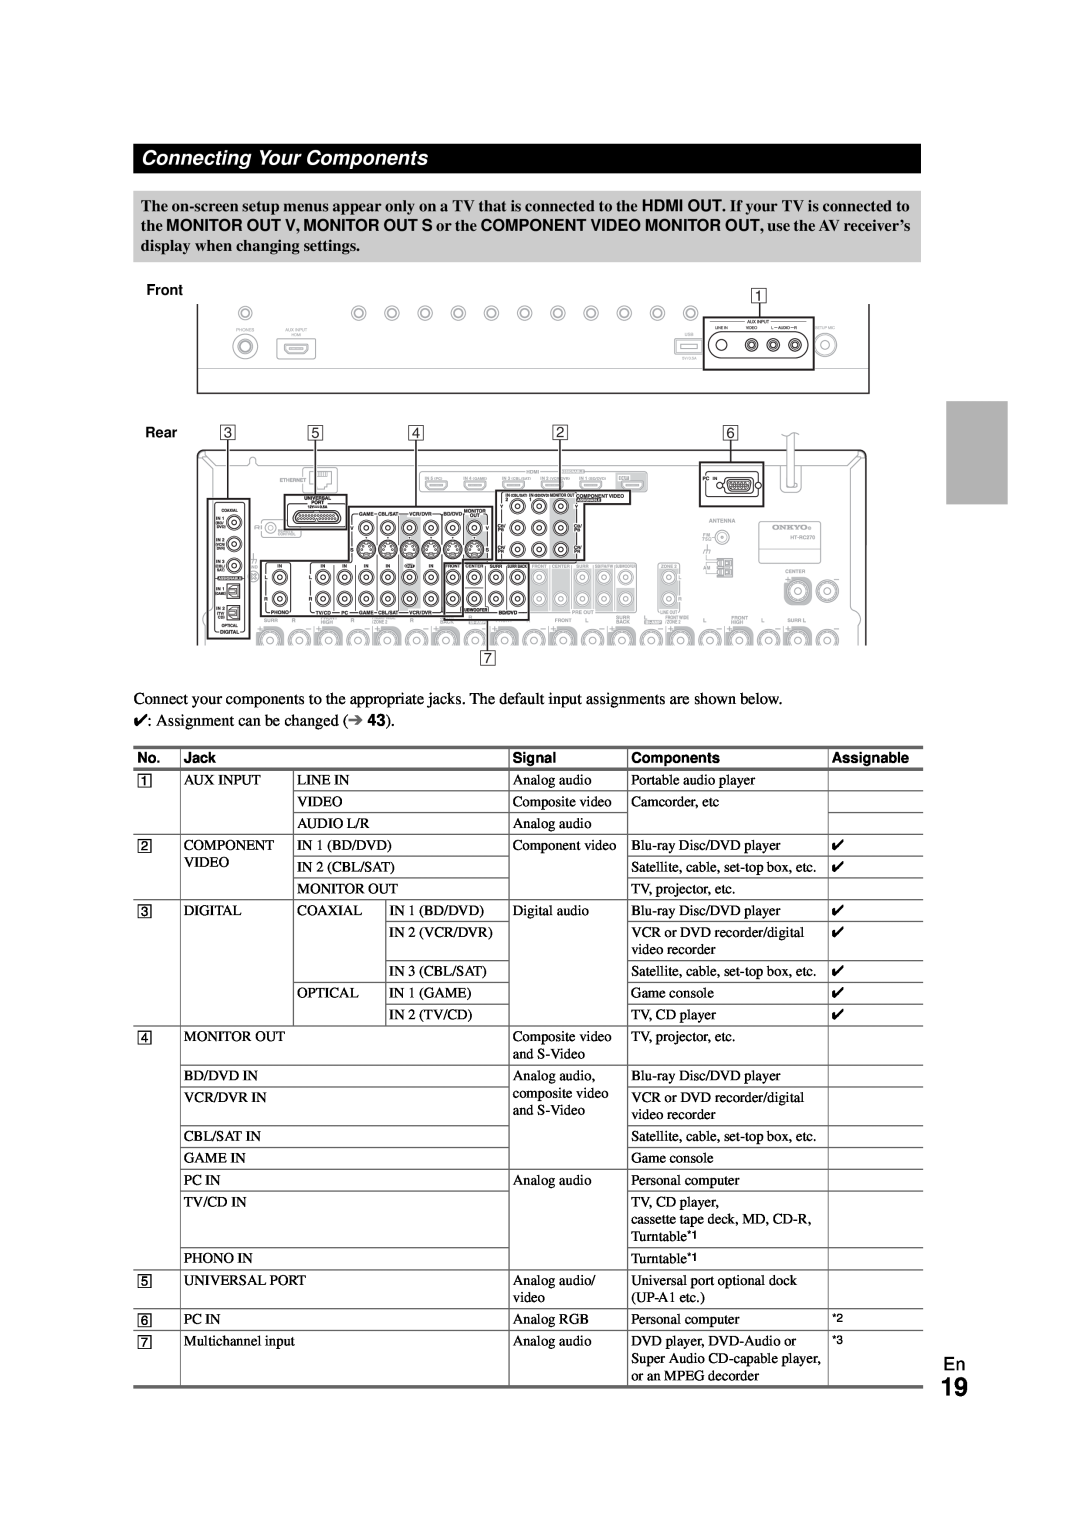 Onkyo HT-RC270 instruction manual Connecting Your Components, display when changing settings 